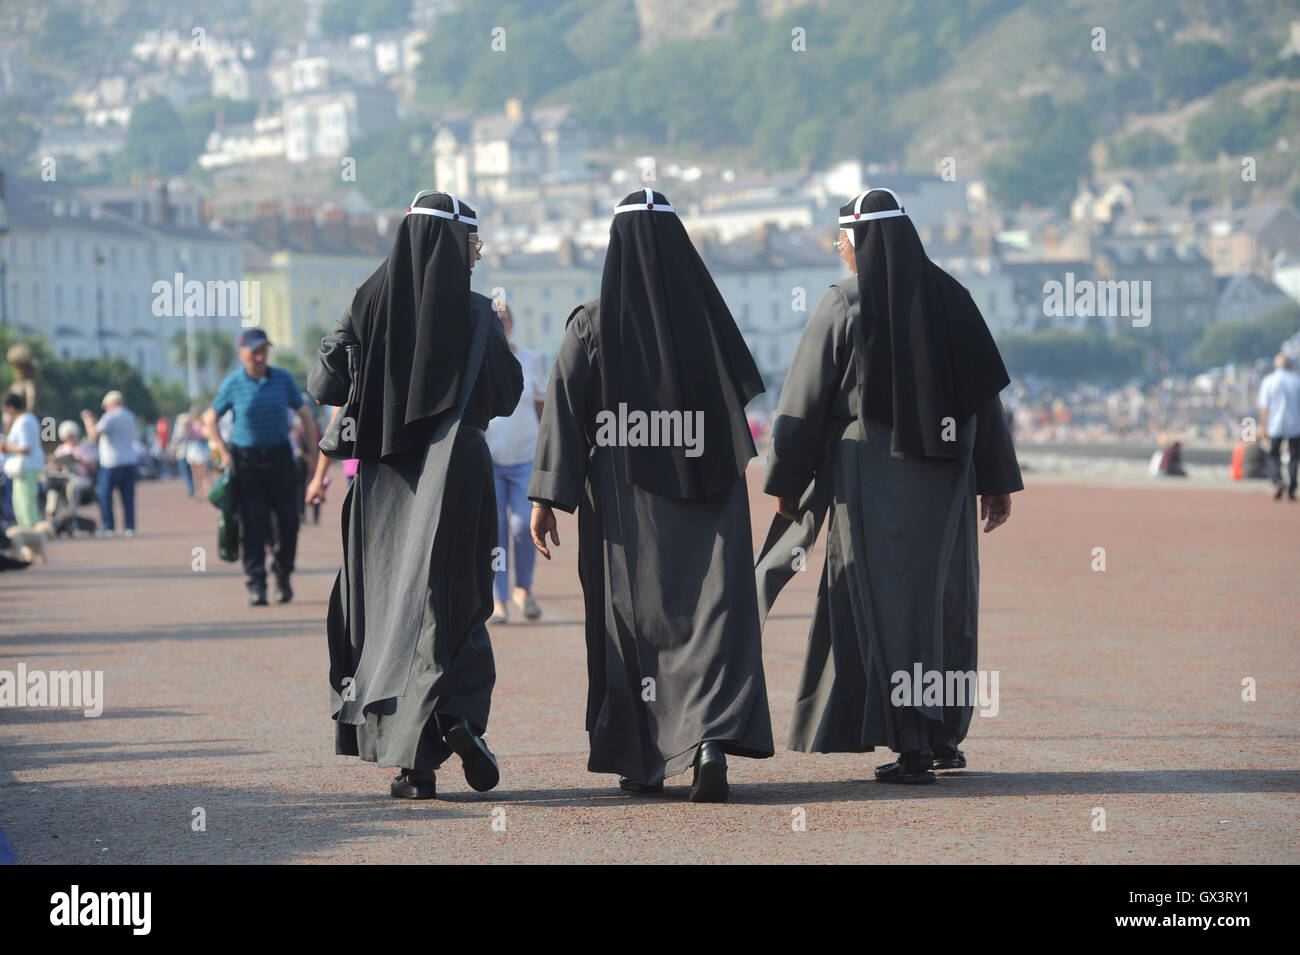 WOMEN IN RELIGIOUS DRESS WALKING RE RACE RACIST COMMUNITY MULTI CULTURAL BURKA STYLE COVERED HEAD DRESS INTEGRATION BRITISH UK Stock Photo